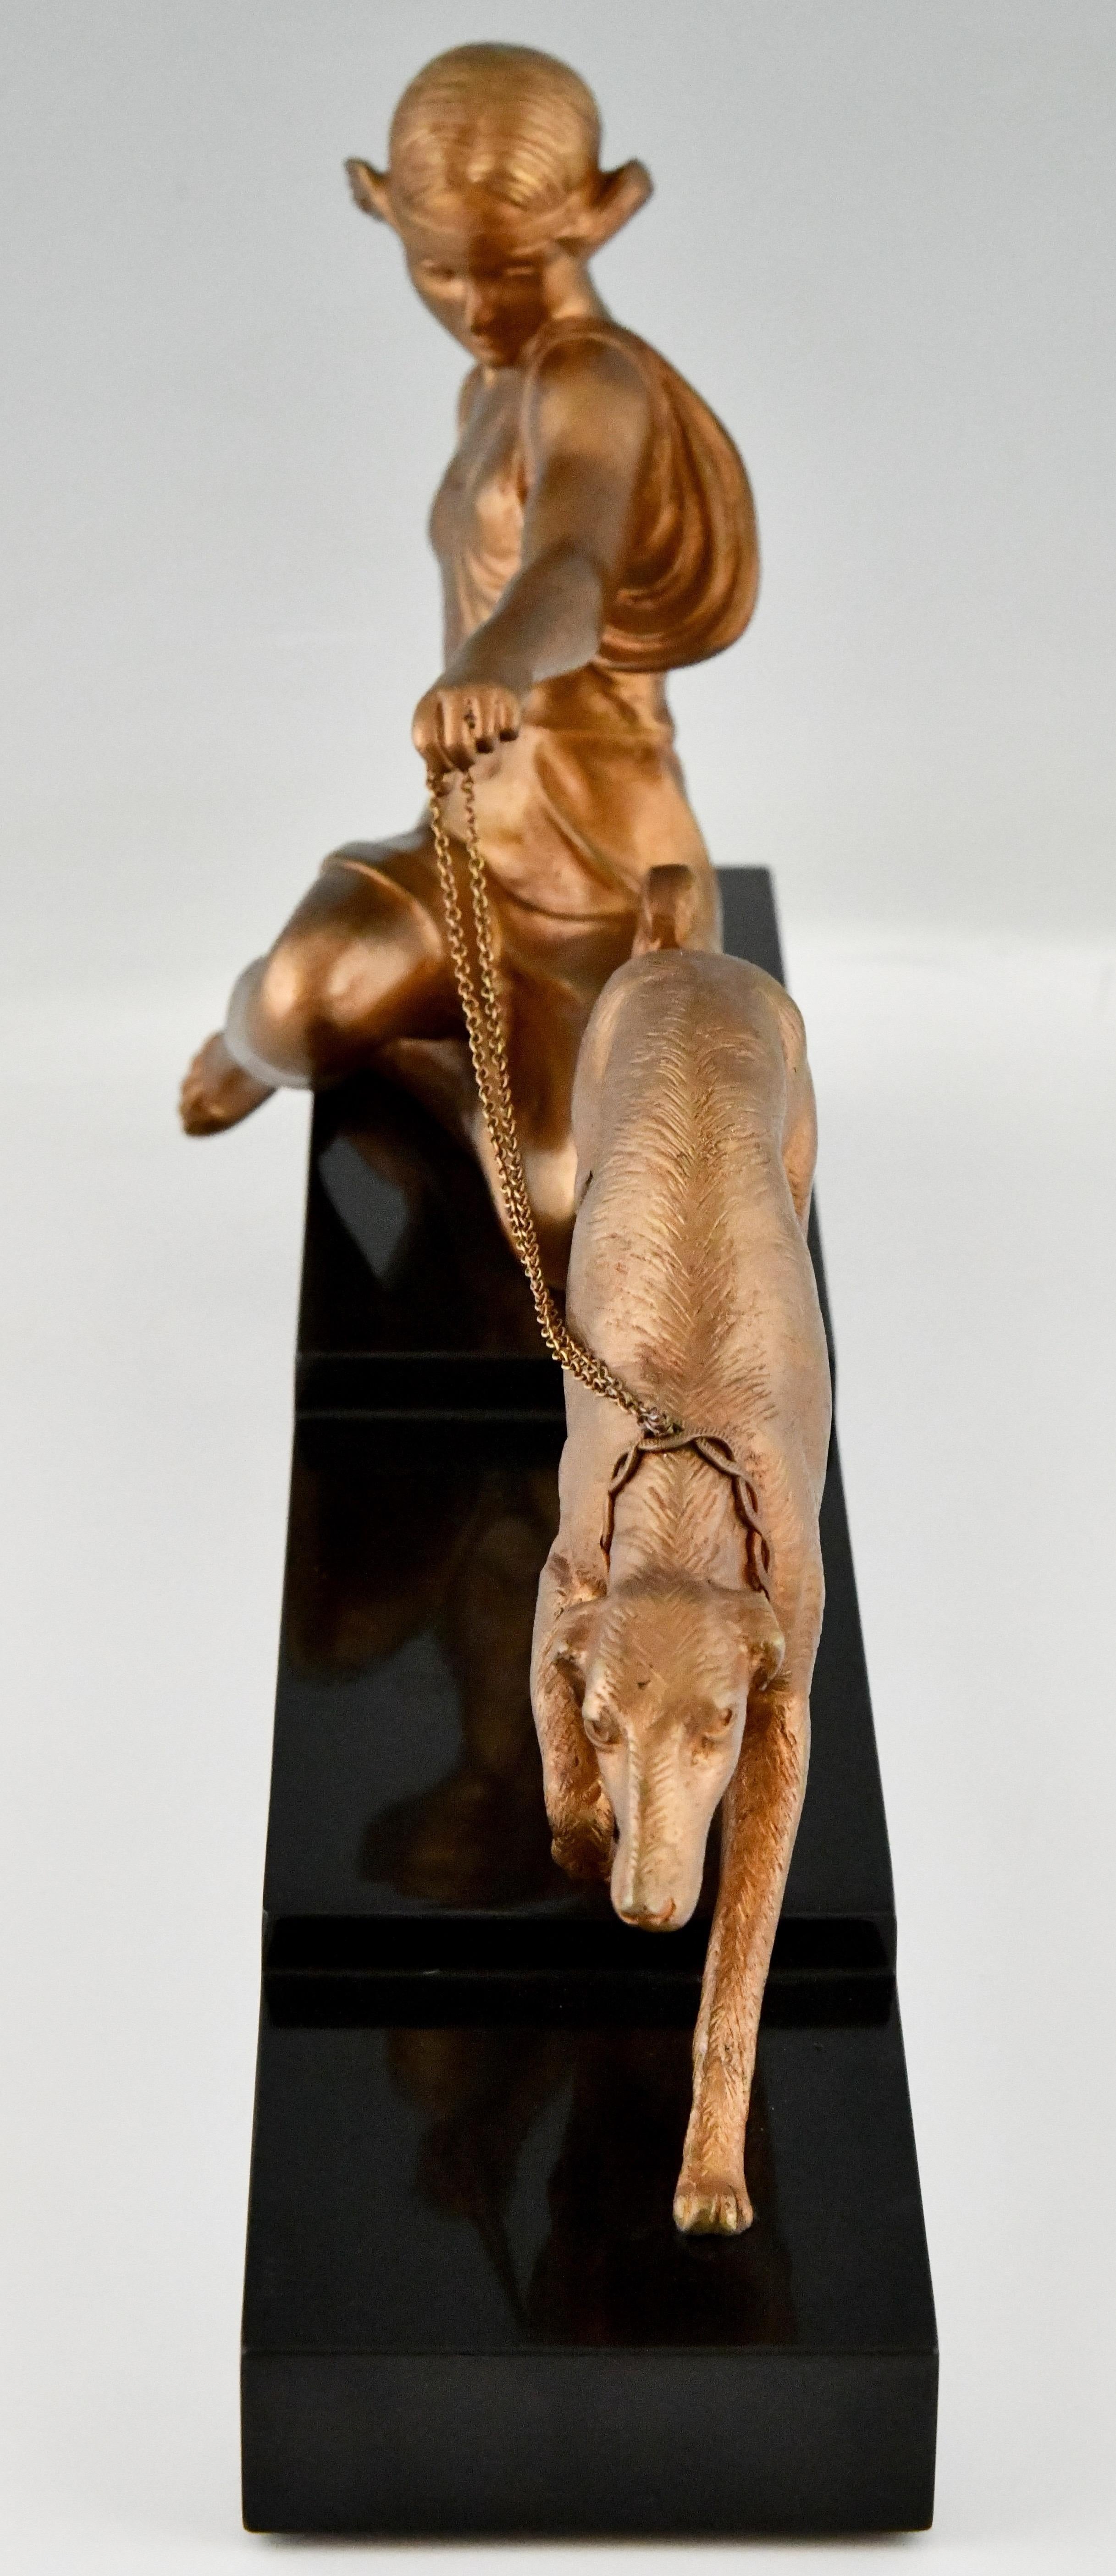 French Art Deco Bronze Sculpture Lady with Greyhound Dog by Armand Godard 1930 For Sale